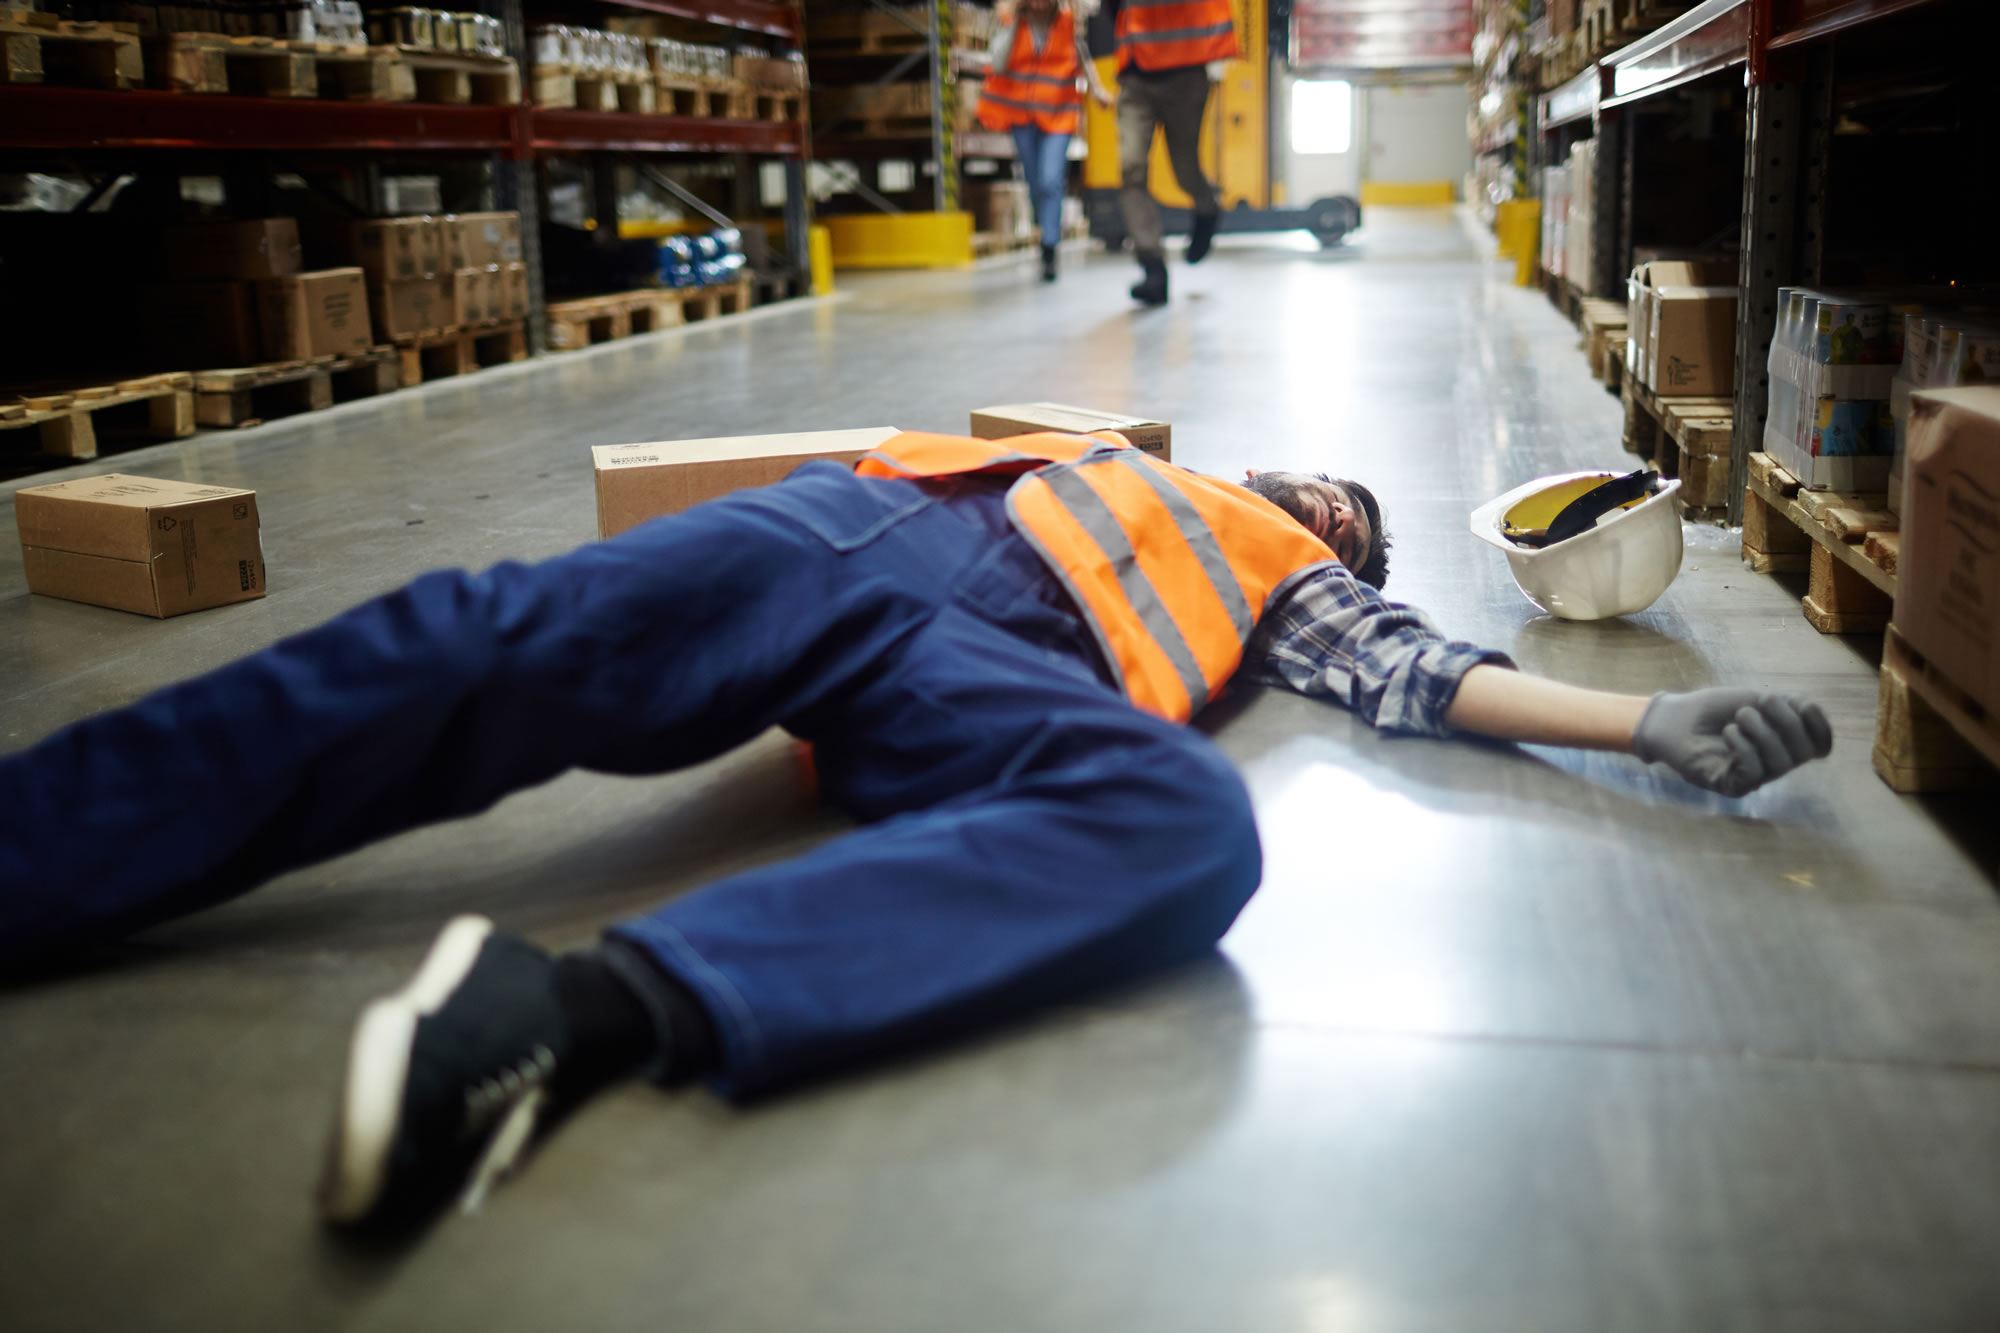 Workplace Slip, Trip or Fall Birmingham - slip and trip hazards in the workplace, suing employer for negligence Birmingham